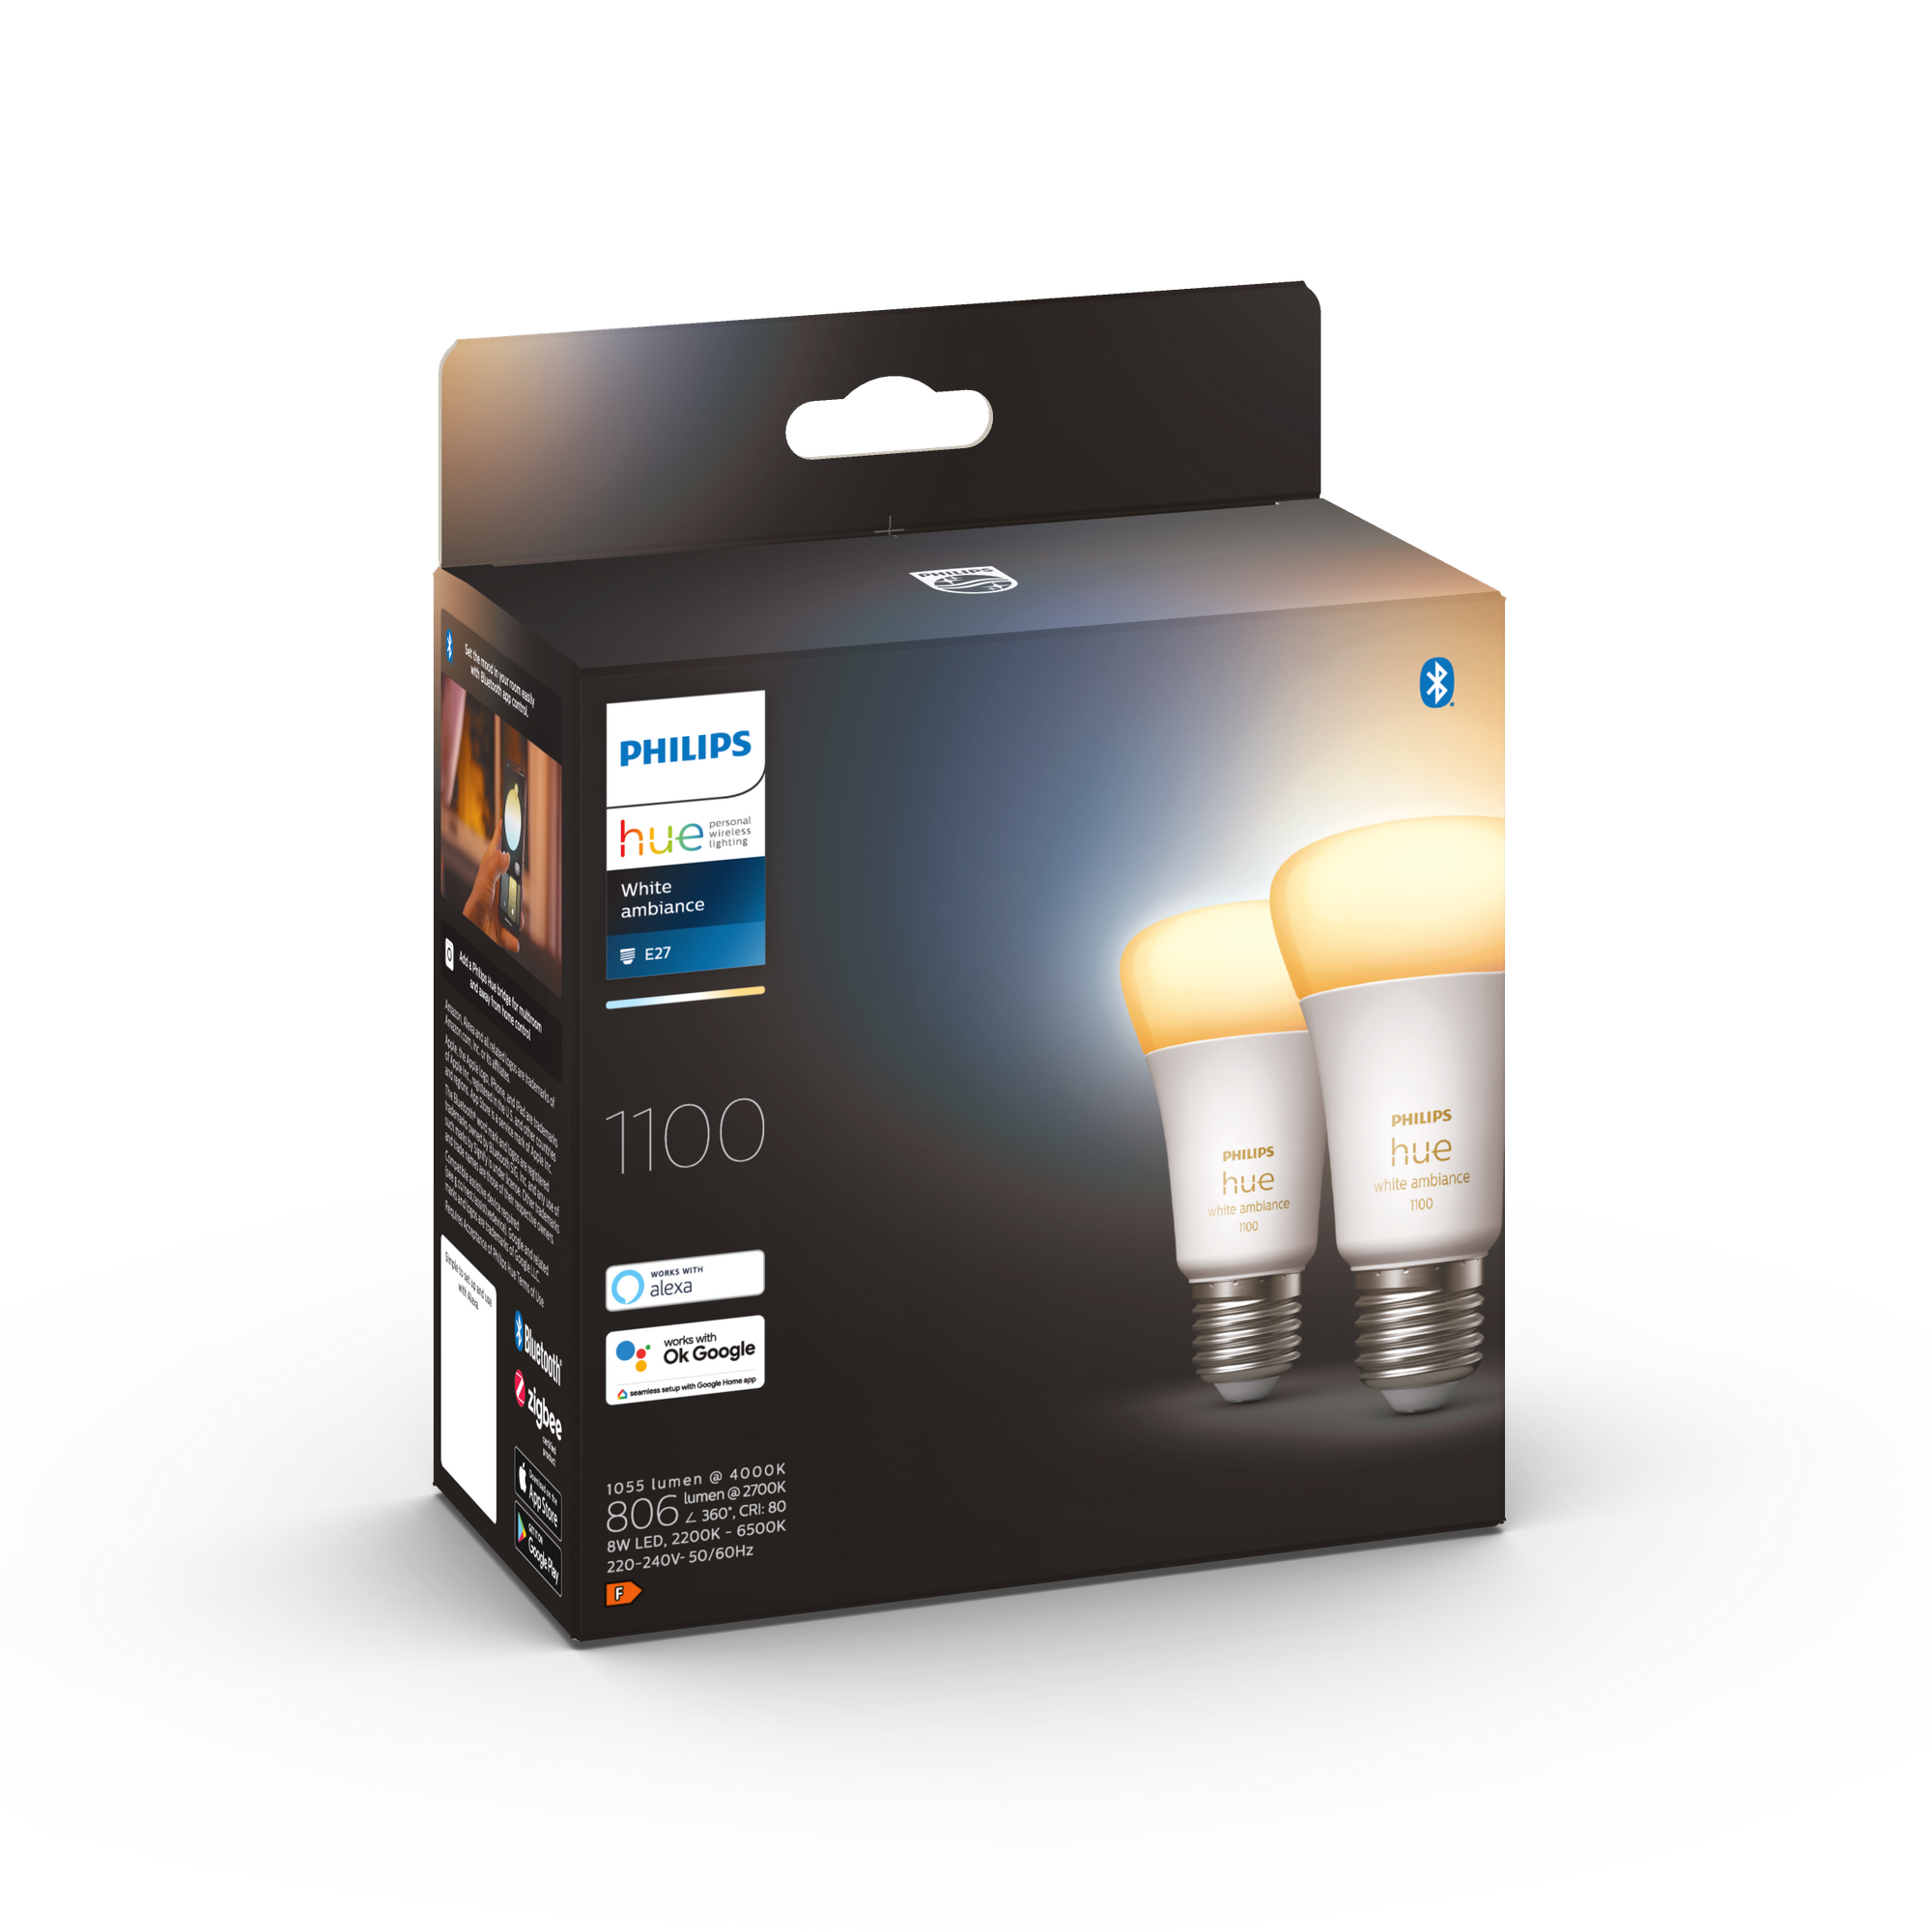 LED-Lampe 'Hue White Ambiance' E27 8 W, 2er-Pack + product picture